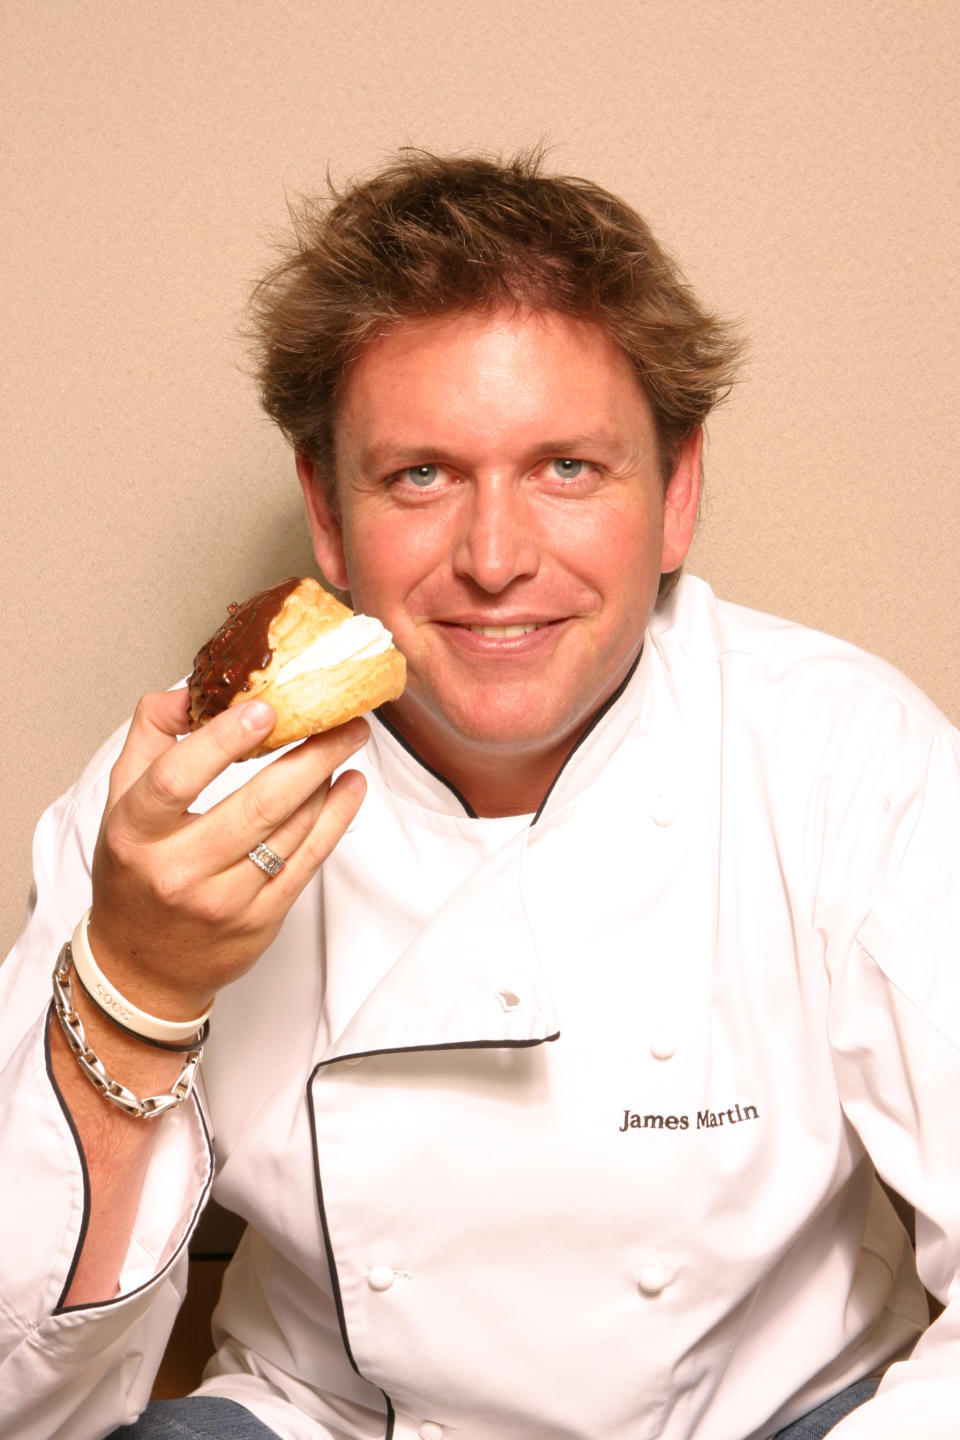 TV chef James Martin was on-hand to reply to complaints on Twitter. (Getty)